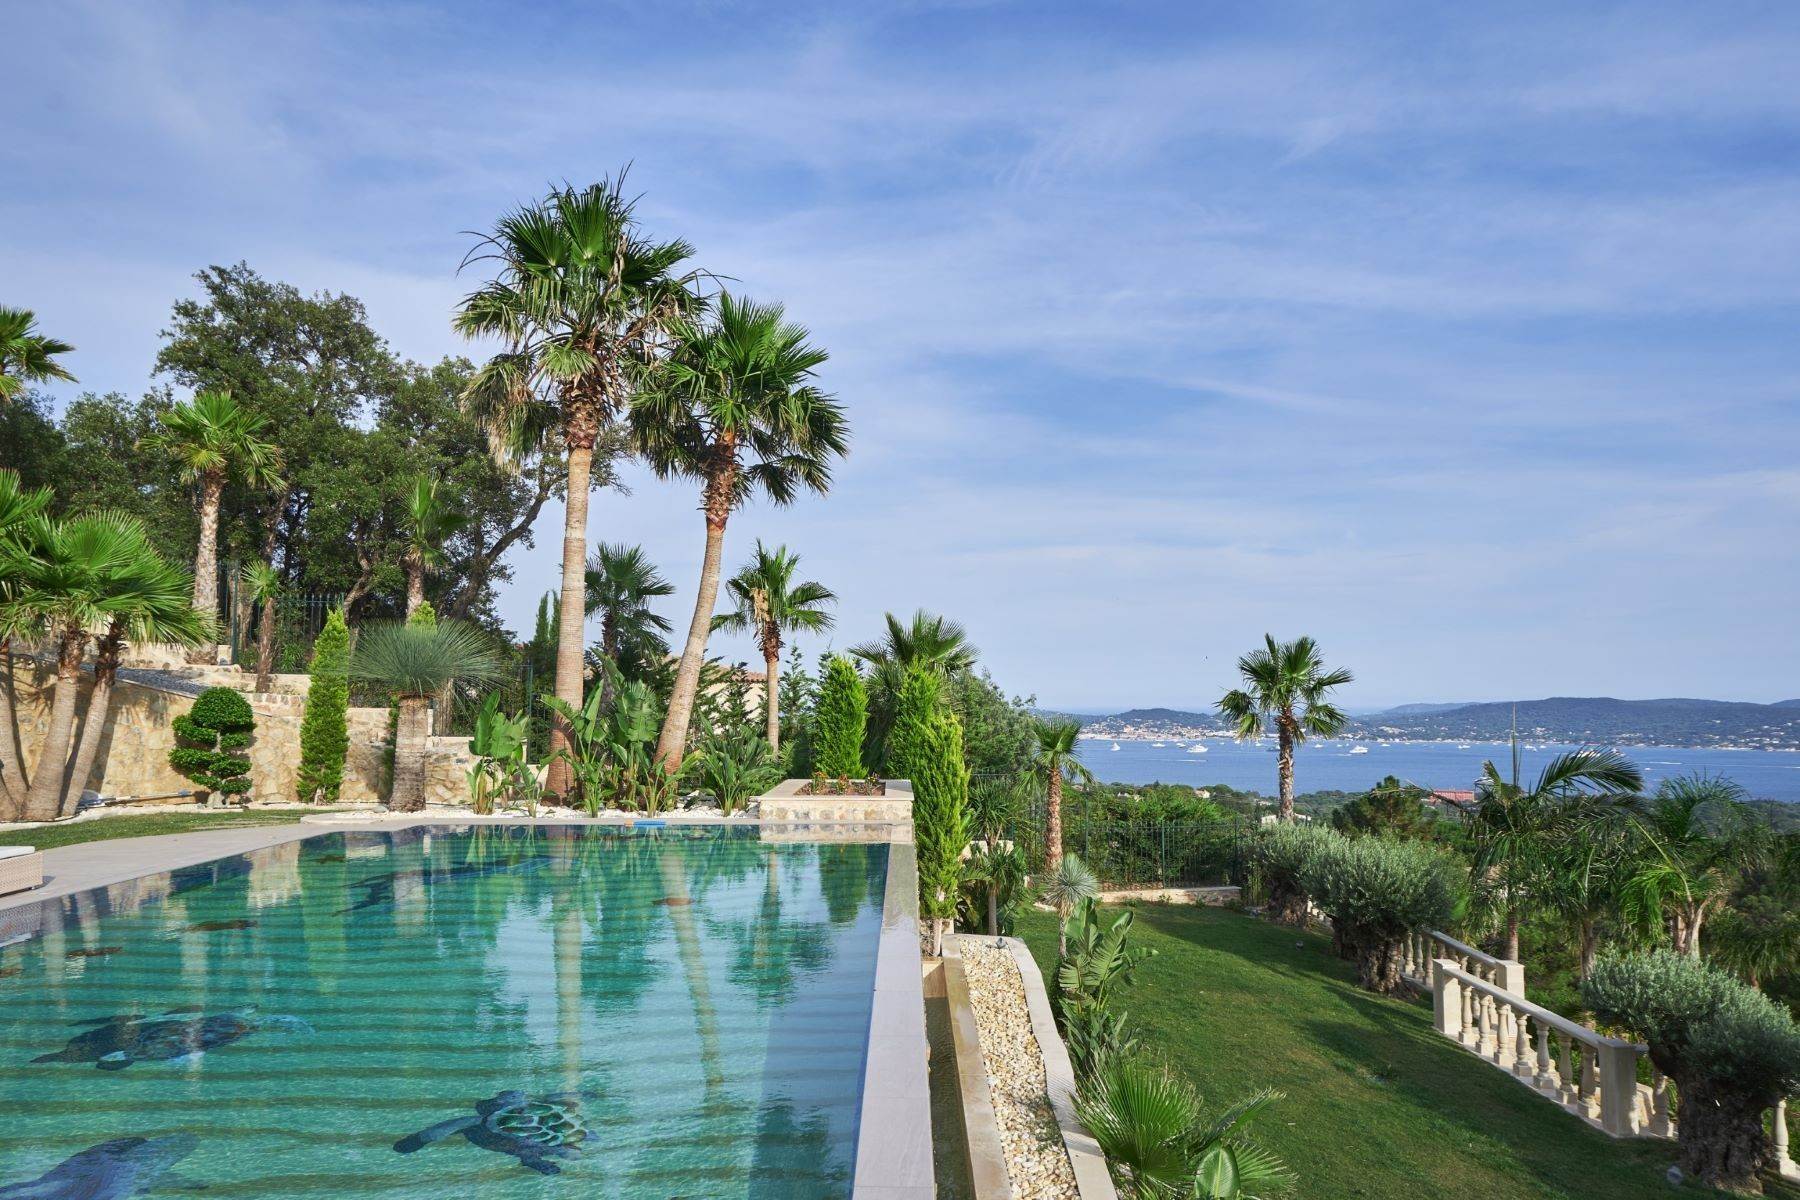 Single Family Homes for Sale at Grimaud, Domaine de Beauvallon - Luxury property with sea view. Grimaud, Provence-Alpes-Cote D'Azur 83310 France